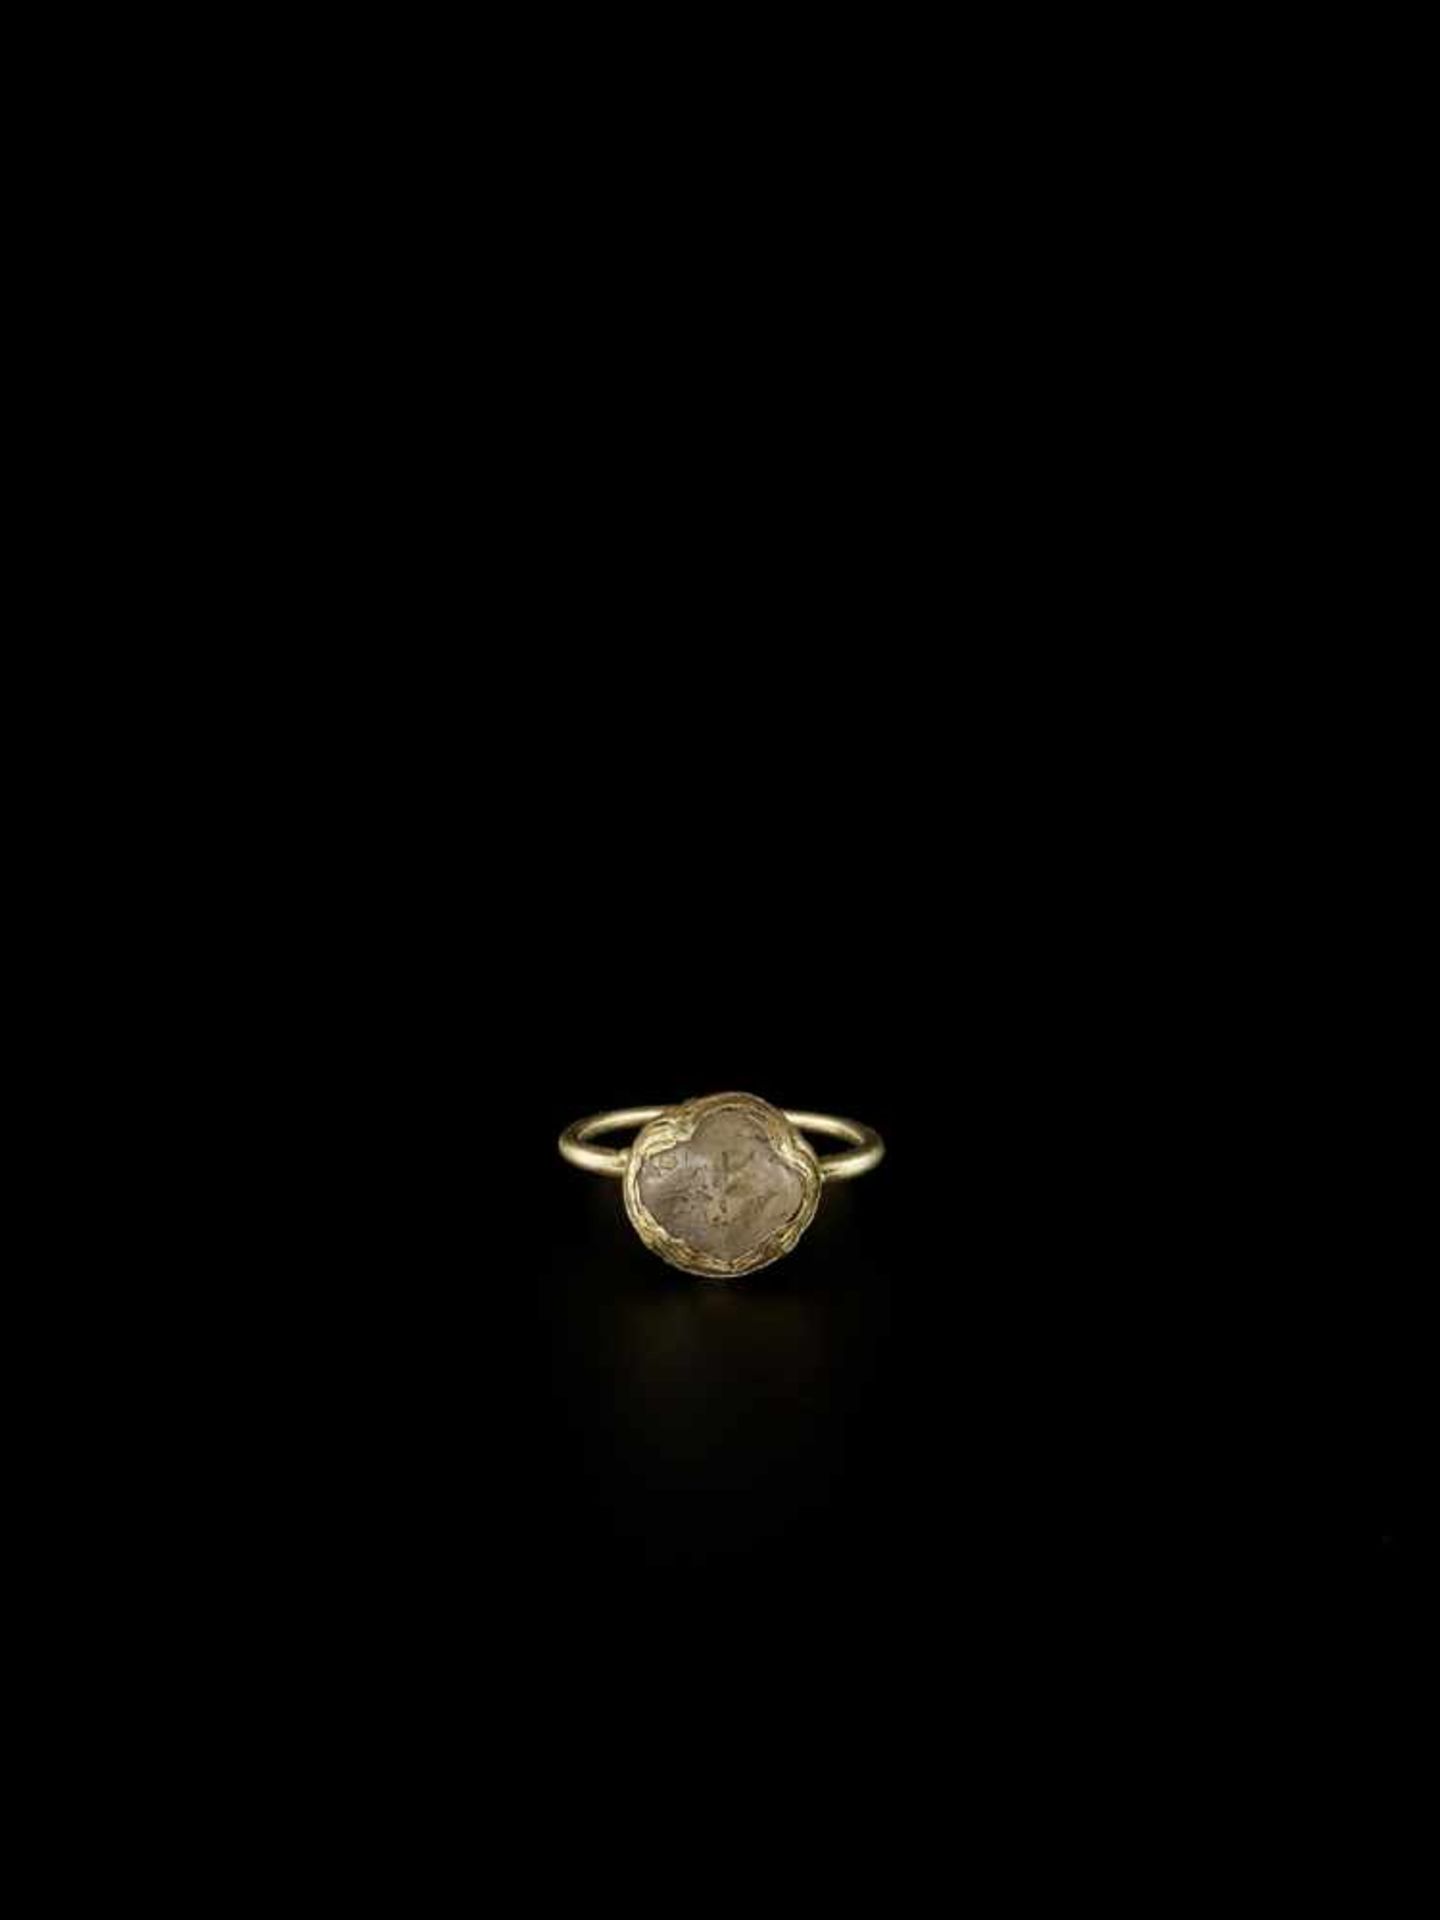 A CHAM GOLD RING WITH A QUARTZ CRYSTAL Champa, c. 10th – 12th century. The delicate gold ring set - Bild 2 aus 4